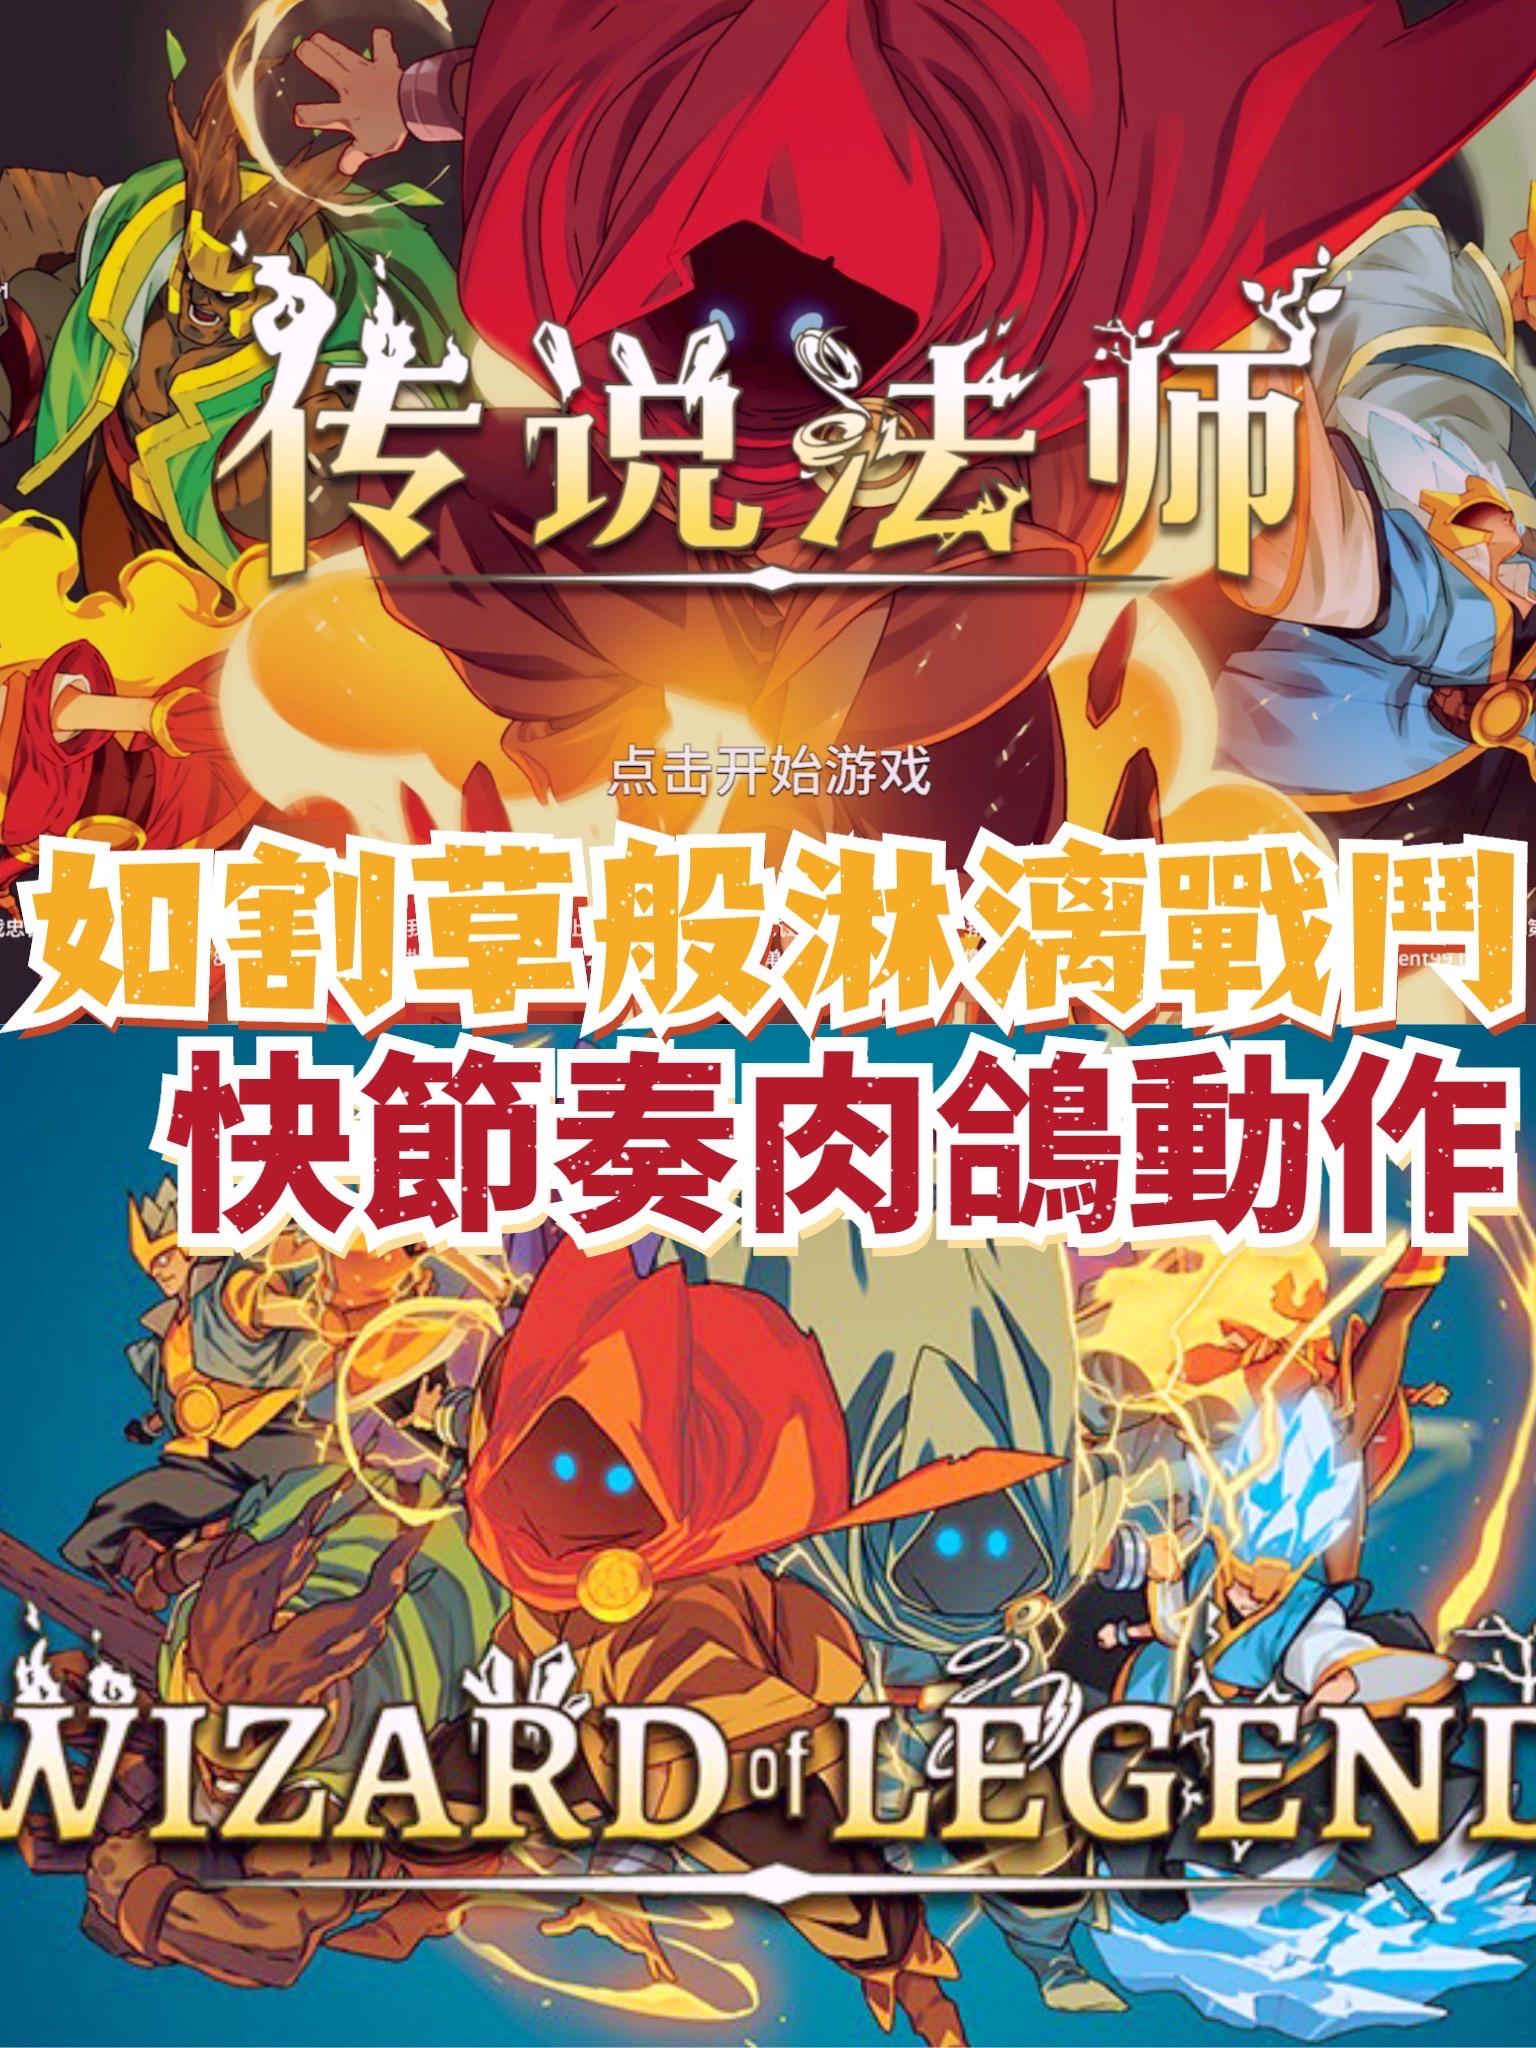 Wizard of Legend is out now on iOS and Android with optimised mobile  features and full controller support